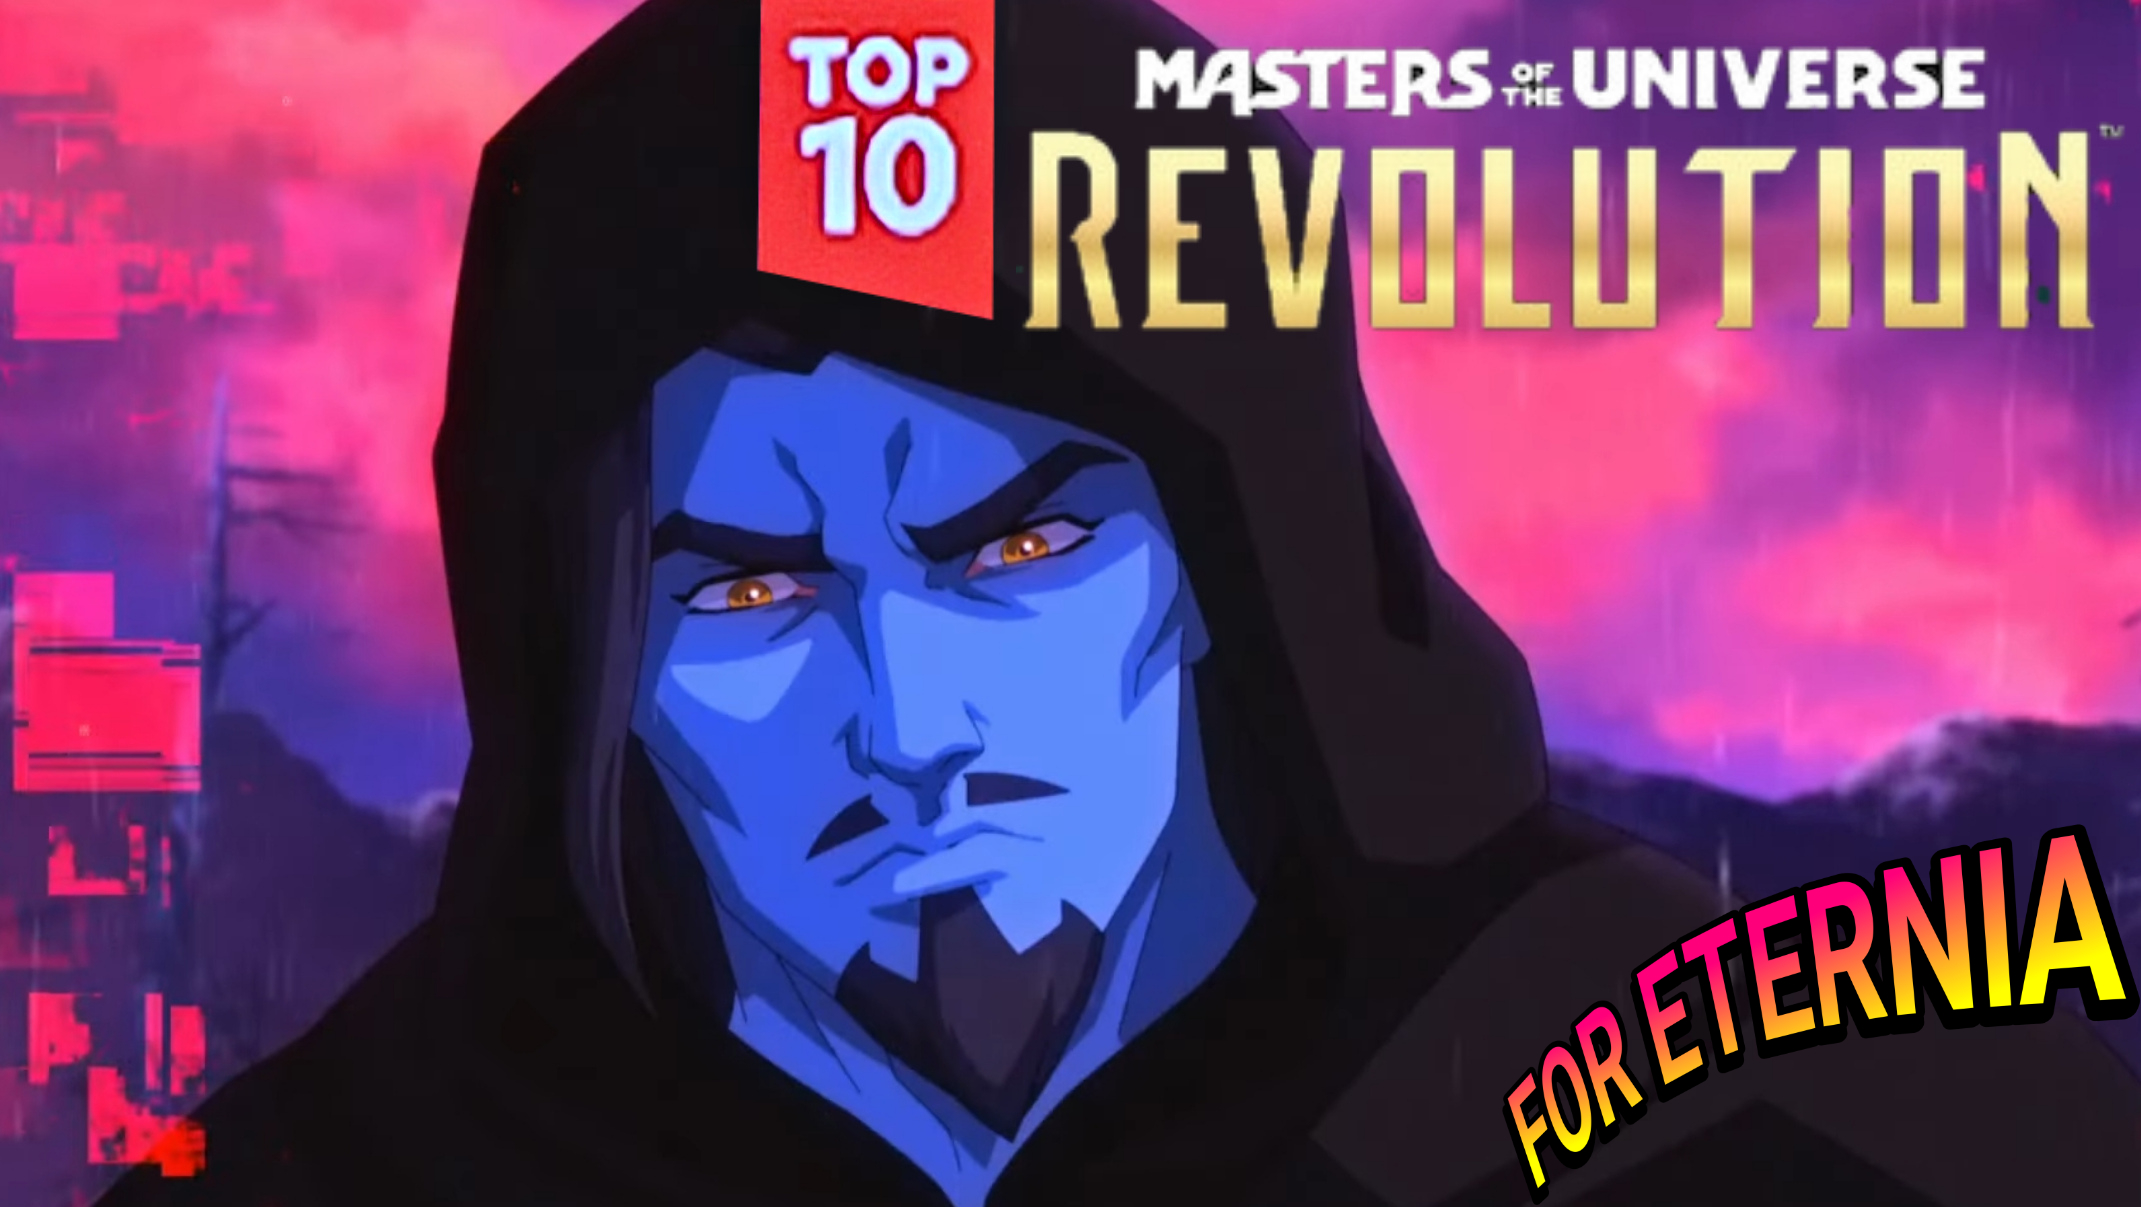 ”Masters of the Universe: Revolution” finishes its U.S. Top-10 run with 6 Days